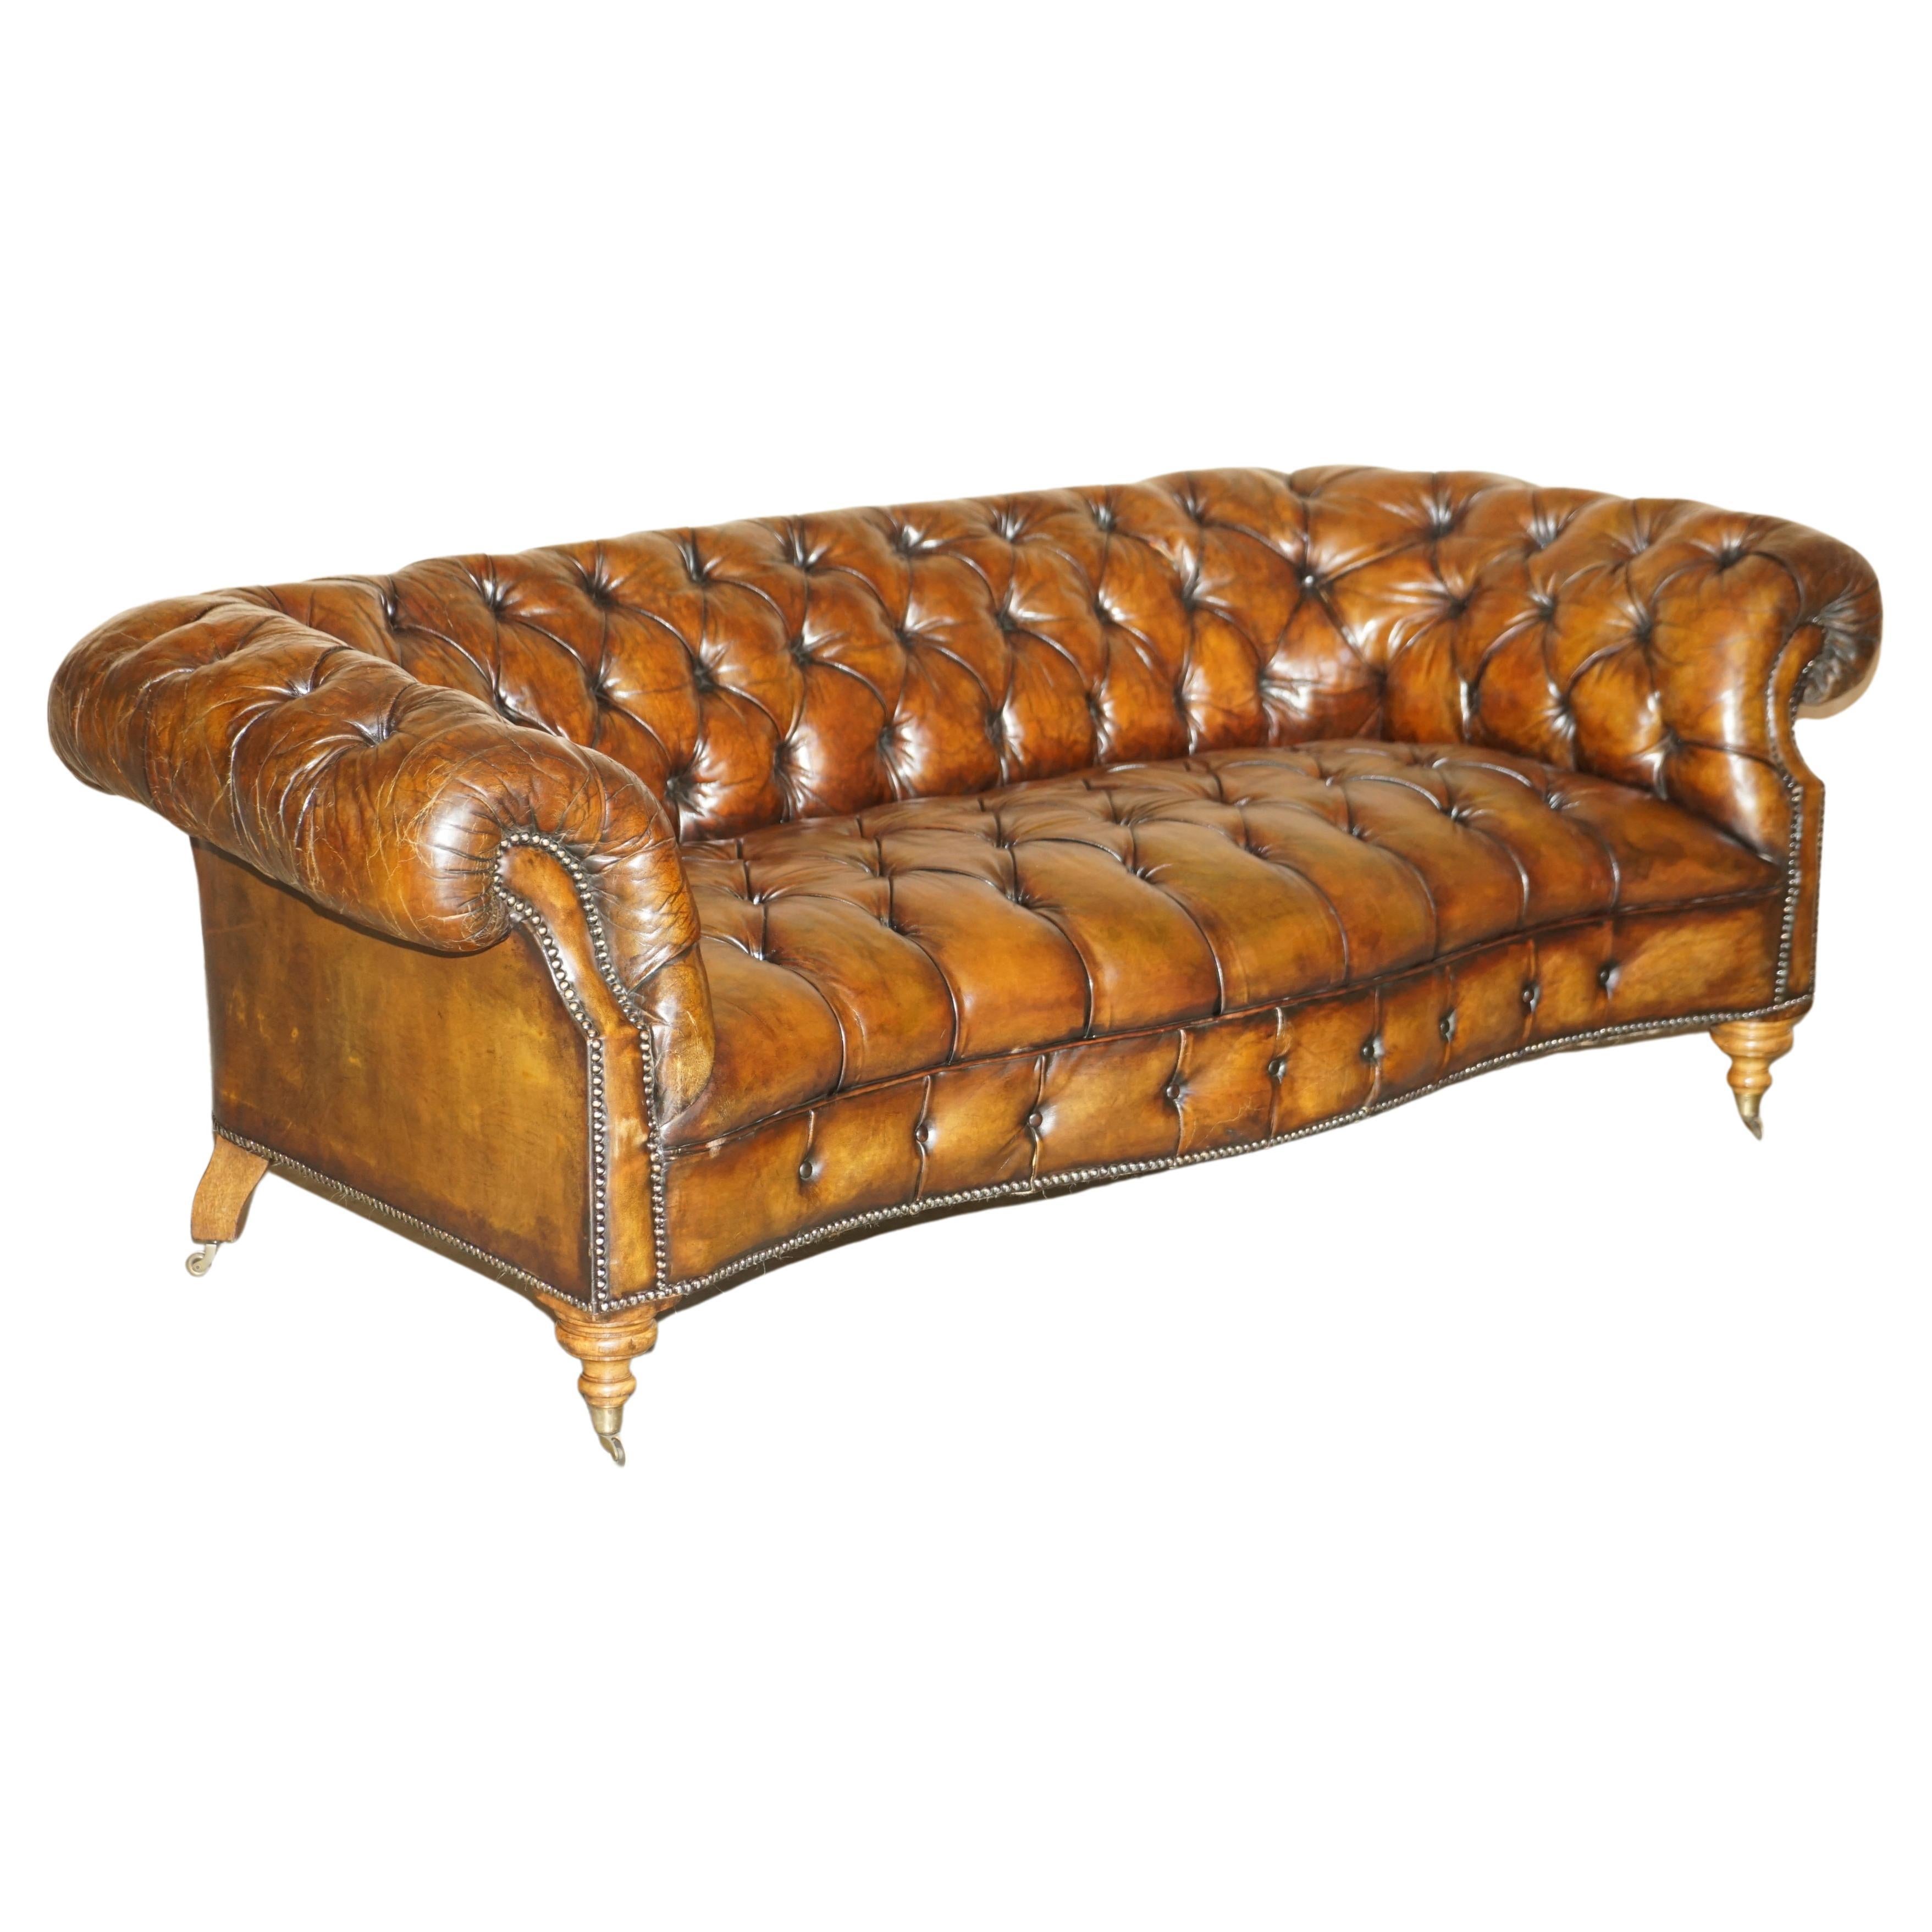 Victorian Serpentine Whisky Brown Leather Chesterfield Sofa After Howard & Son's